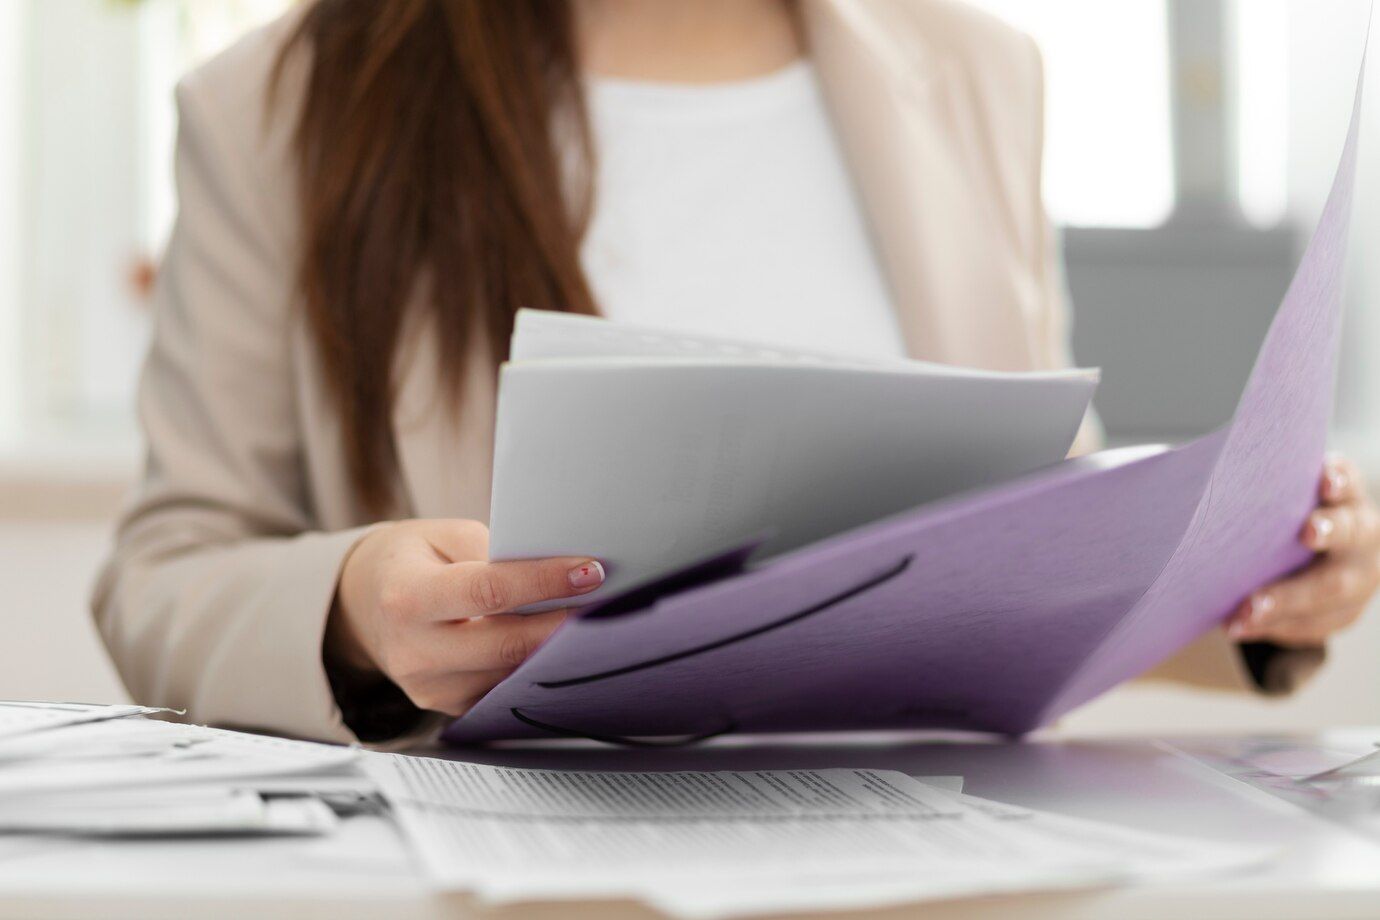 A woman is sitting at a desk holding a purple folder and a piece of paper.